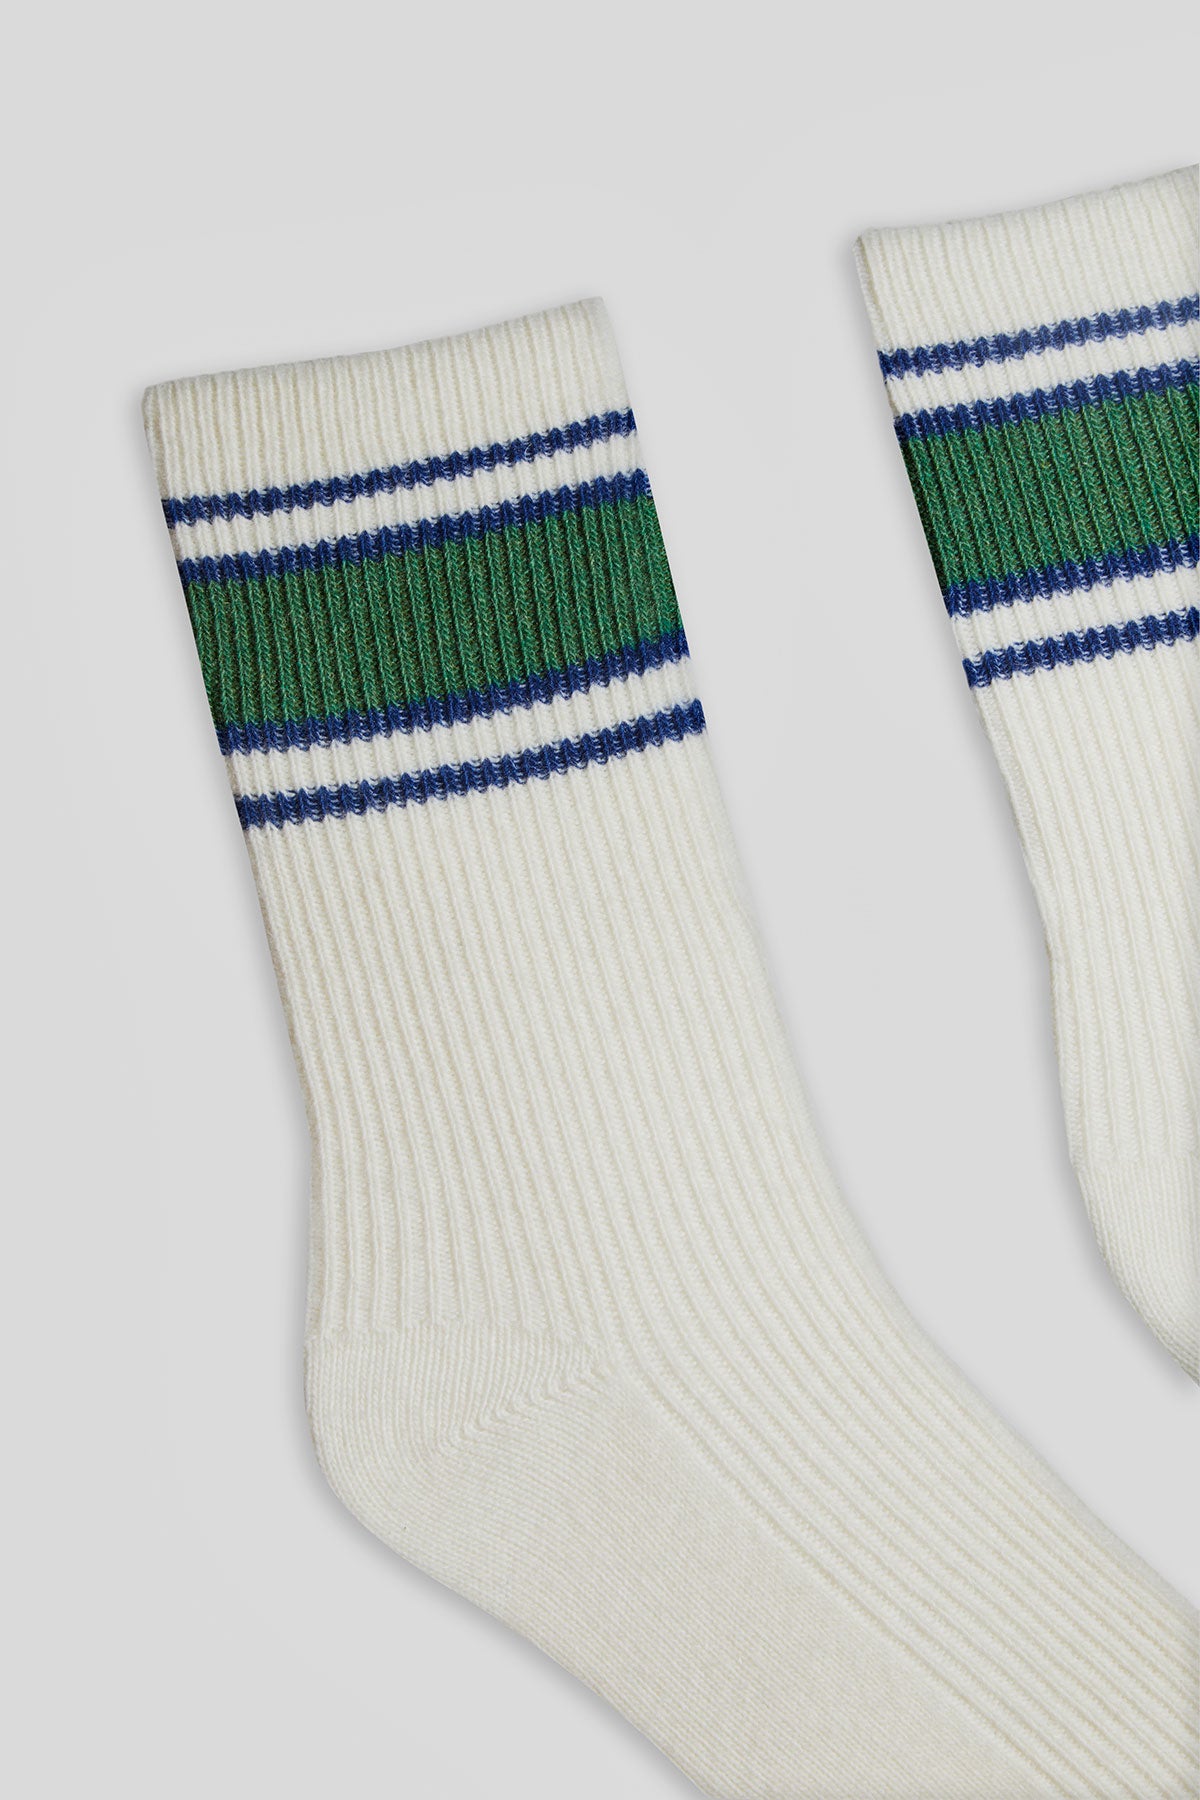   ATHLEISURE CASHMERE CREW SOCKS BY HANSEL FROM BASEL 